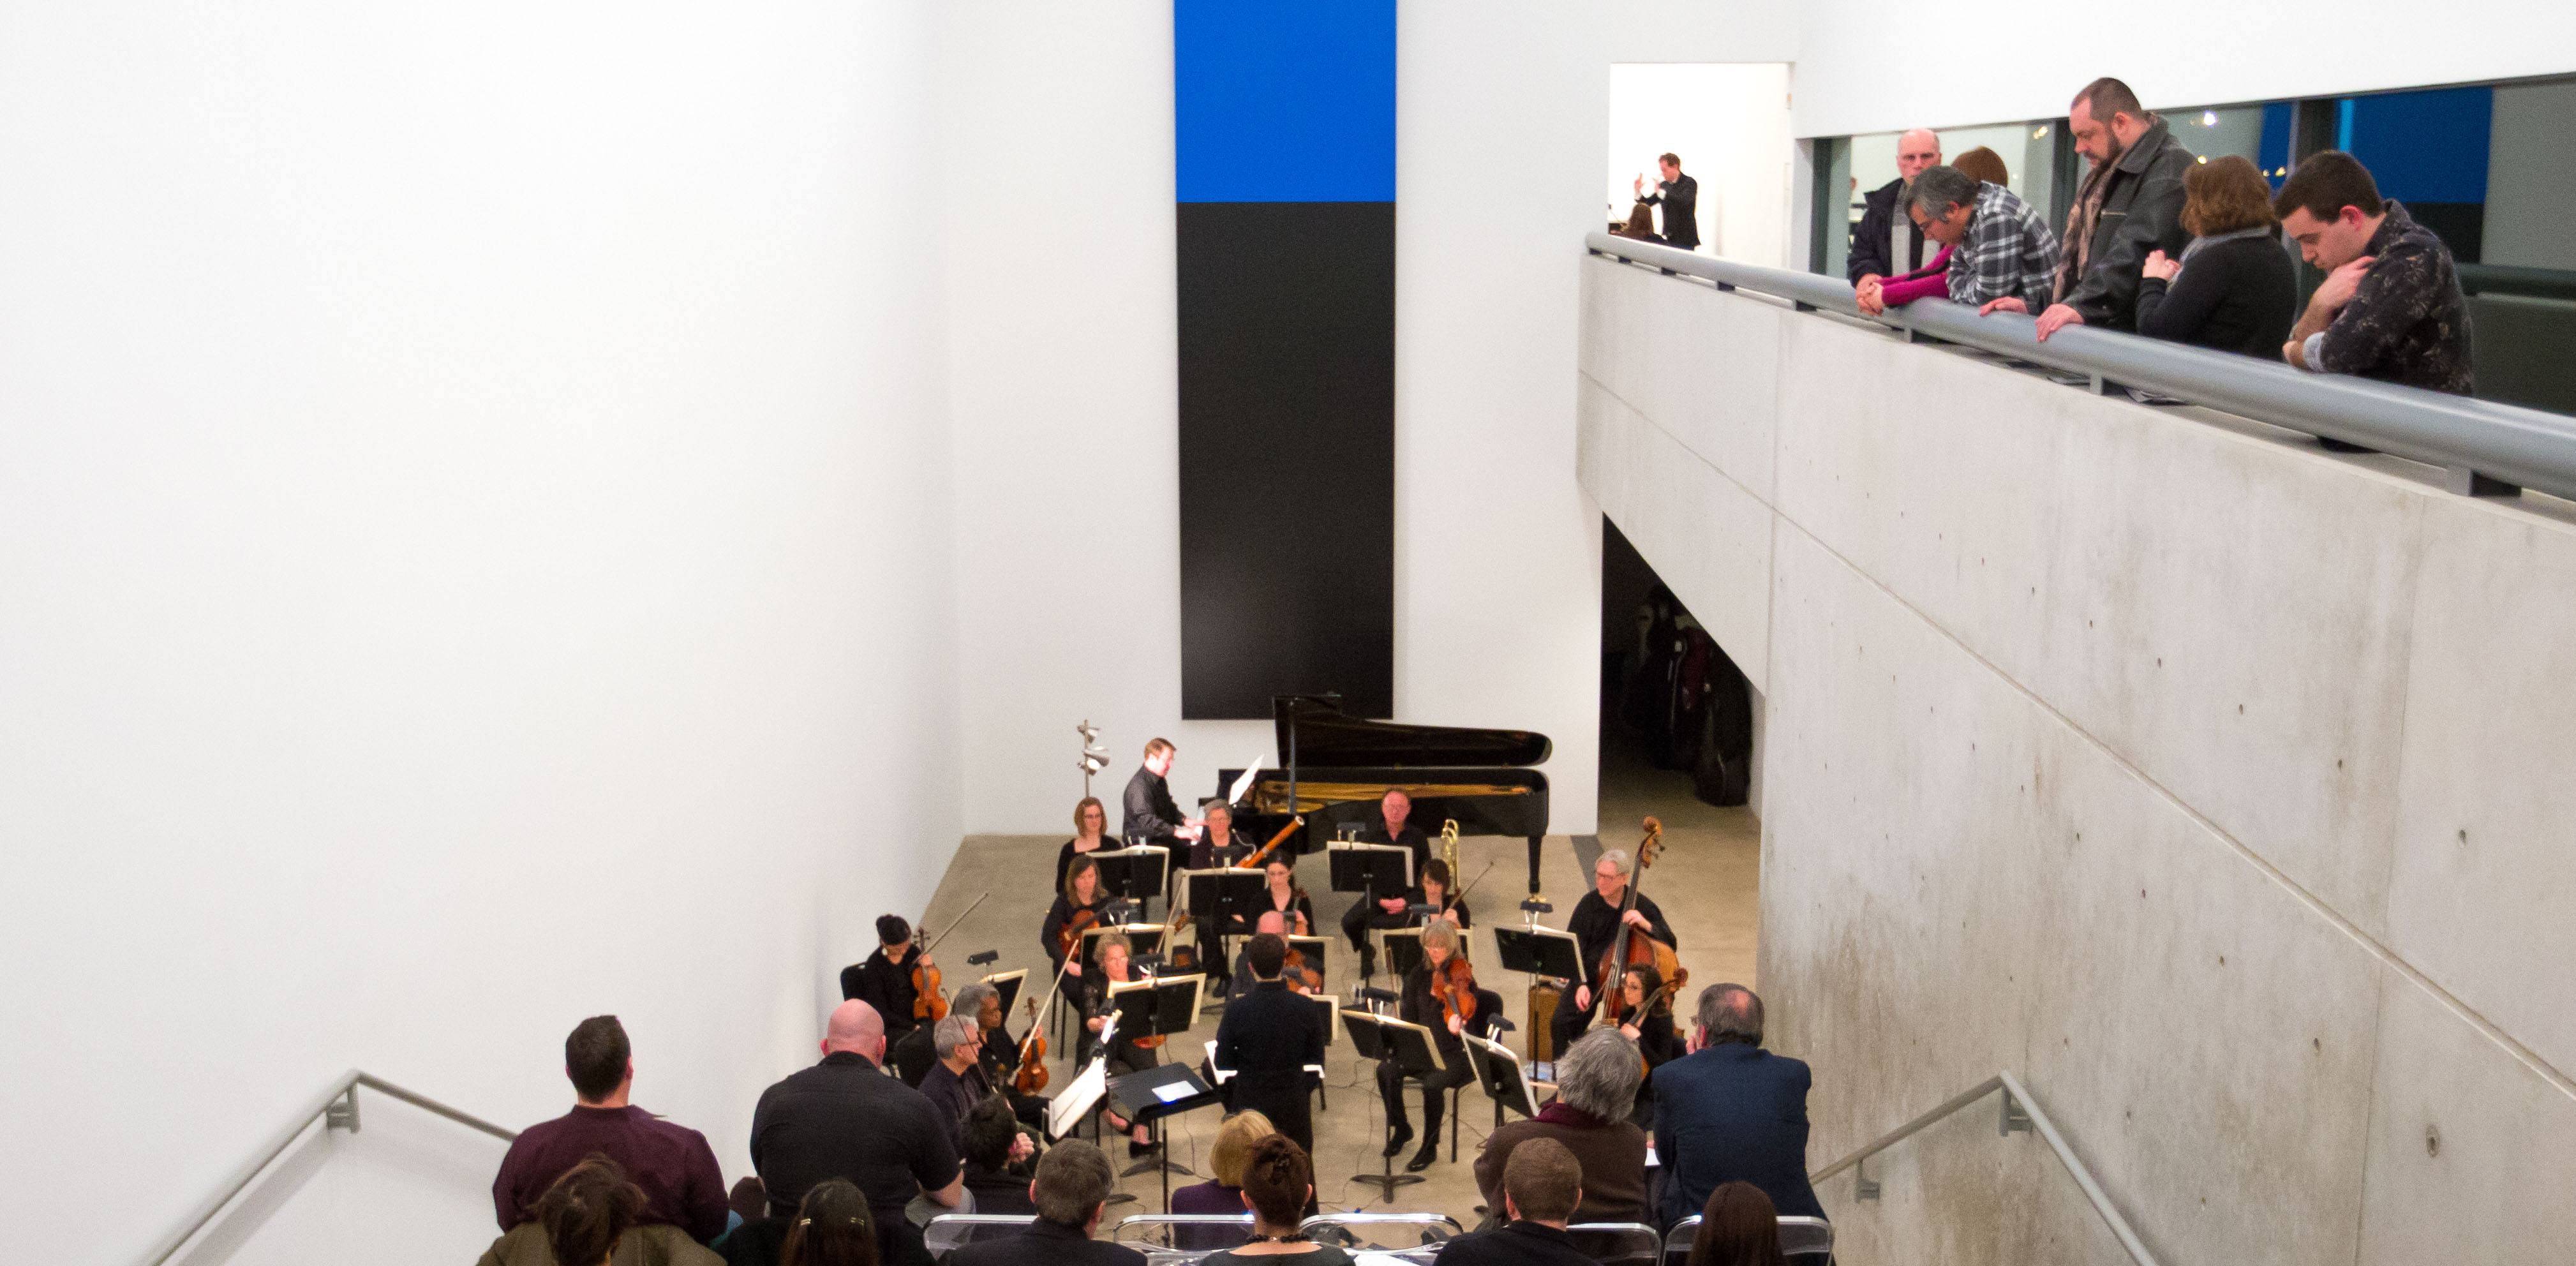 Members of the symphony perform in the Lower Main Gallery and the Cube Gallery for audience members.